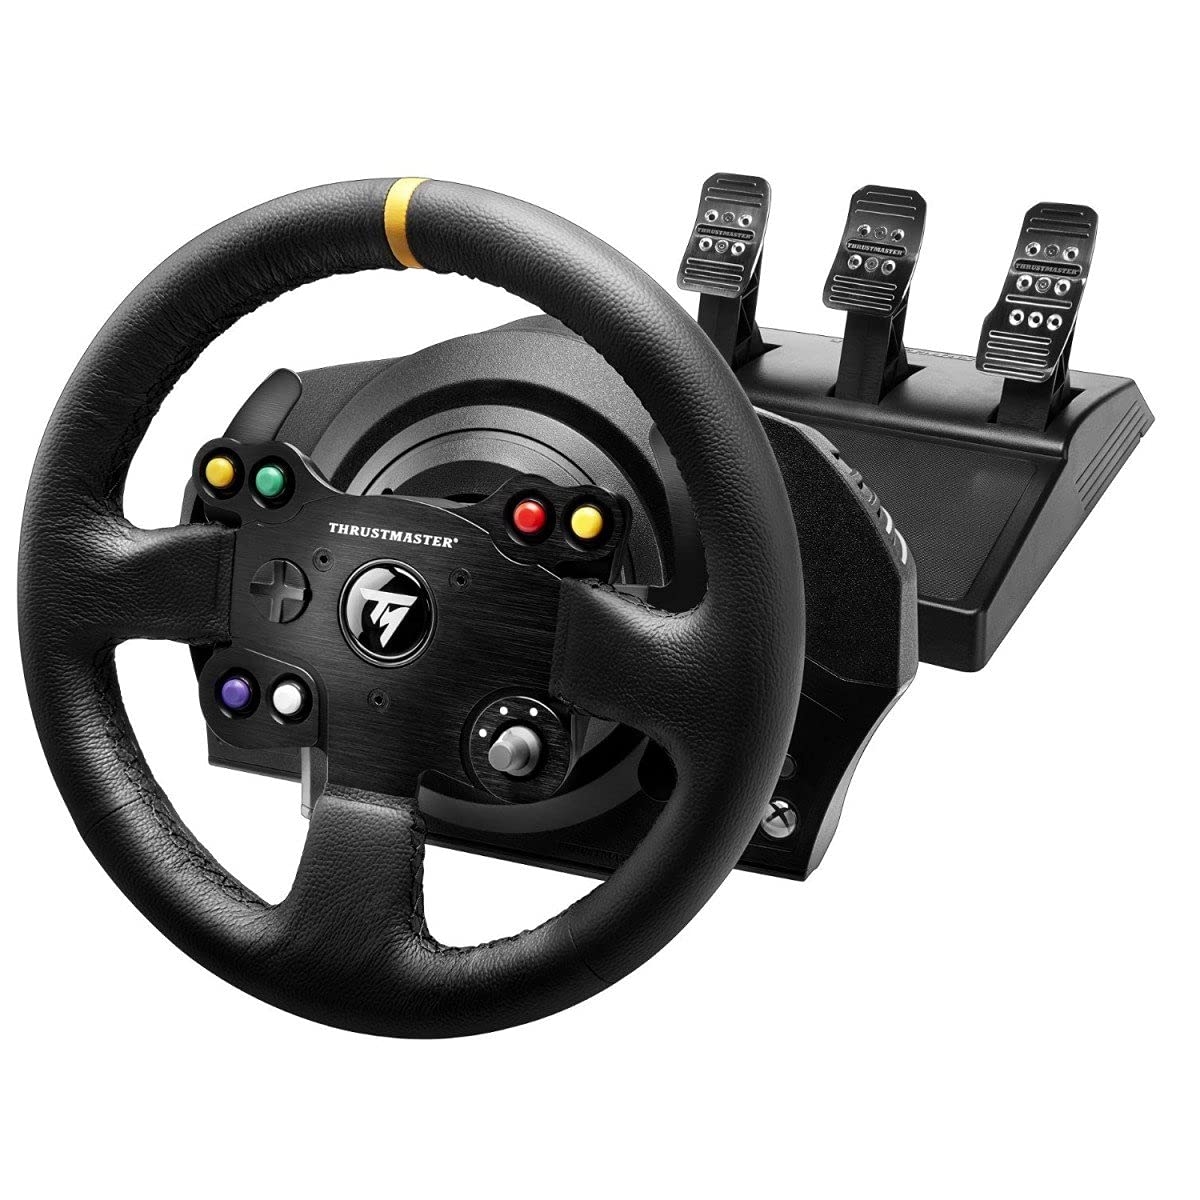 Thrustmaster - TX Racing Wheel Leather Edition inkl. Pedale - [Xbox One]